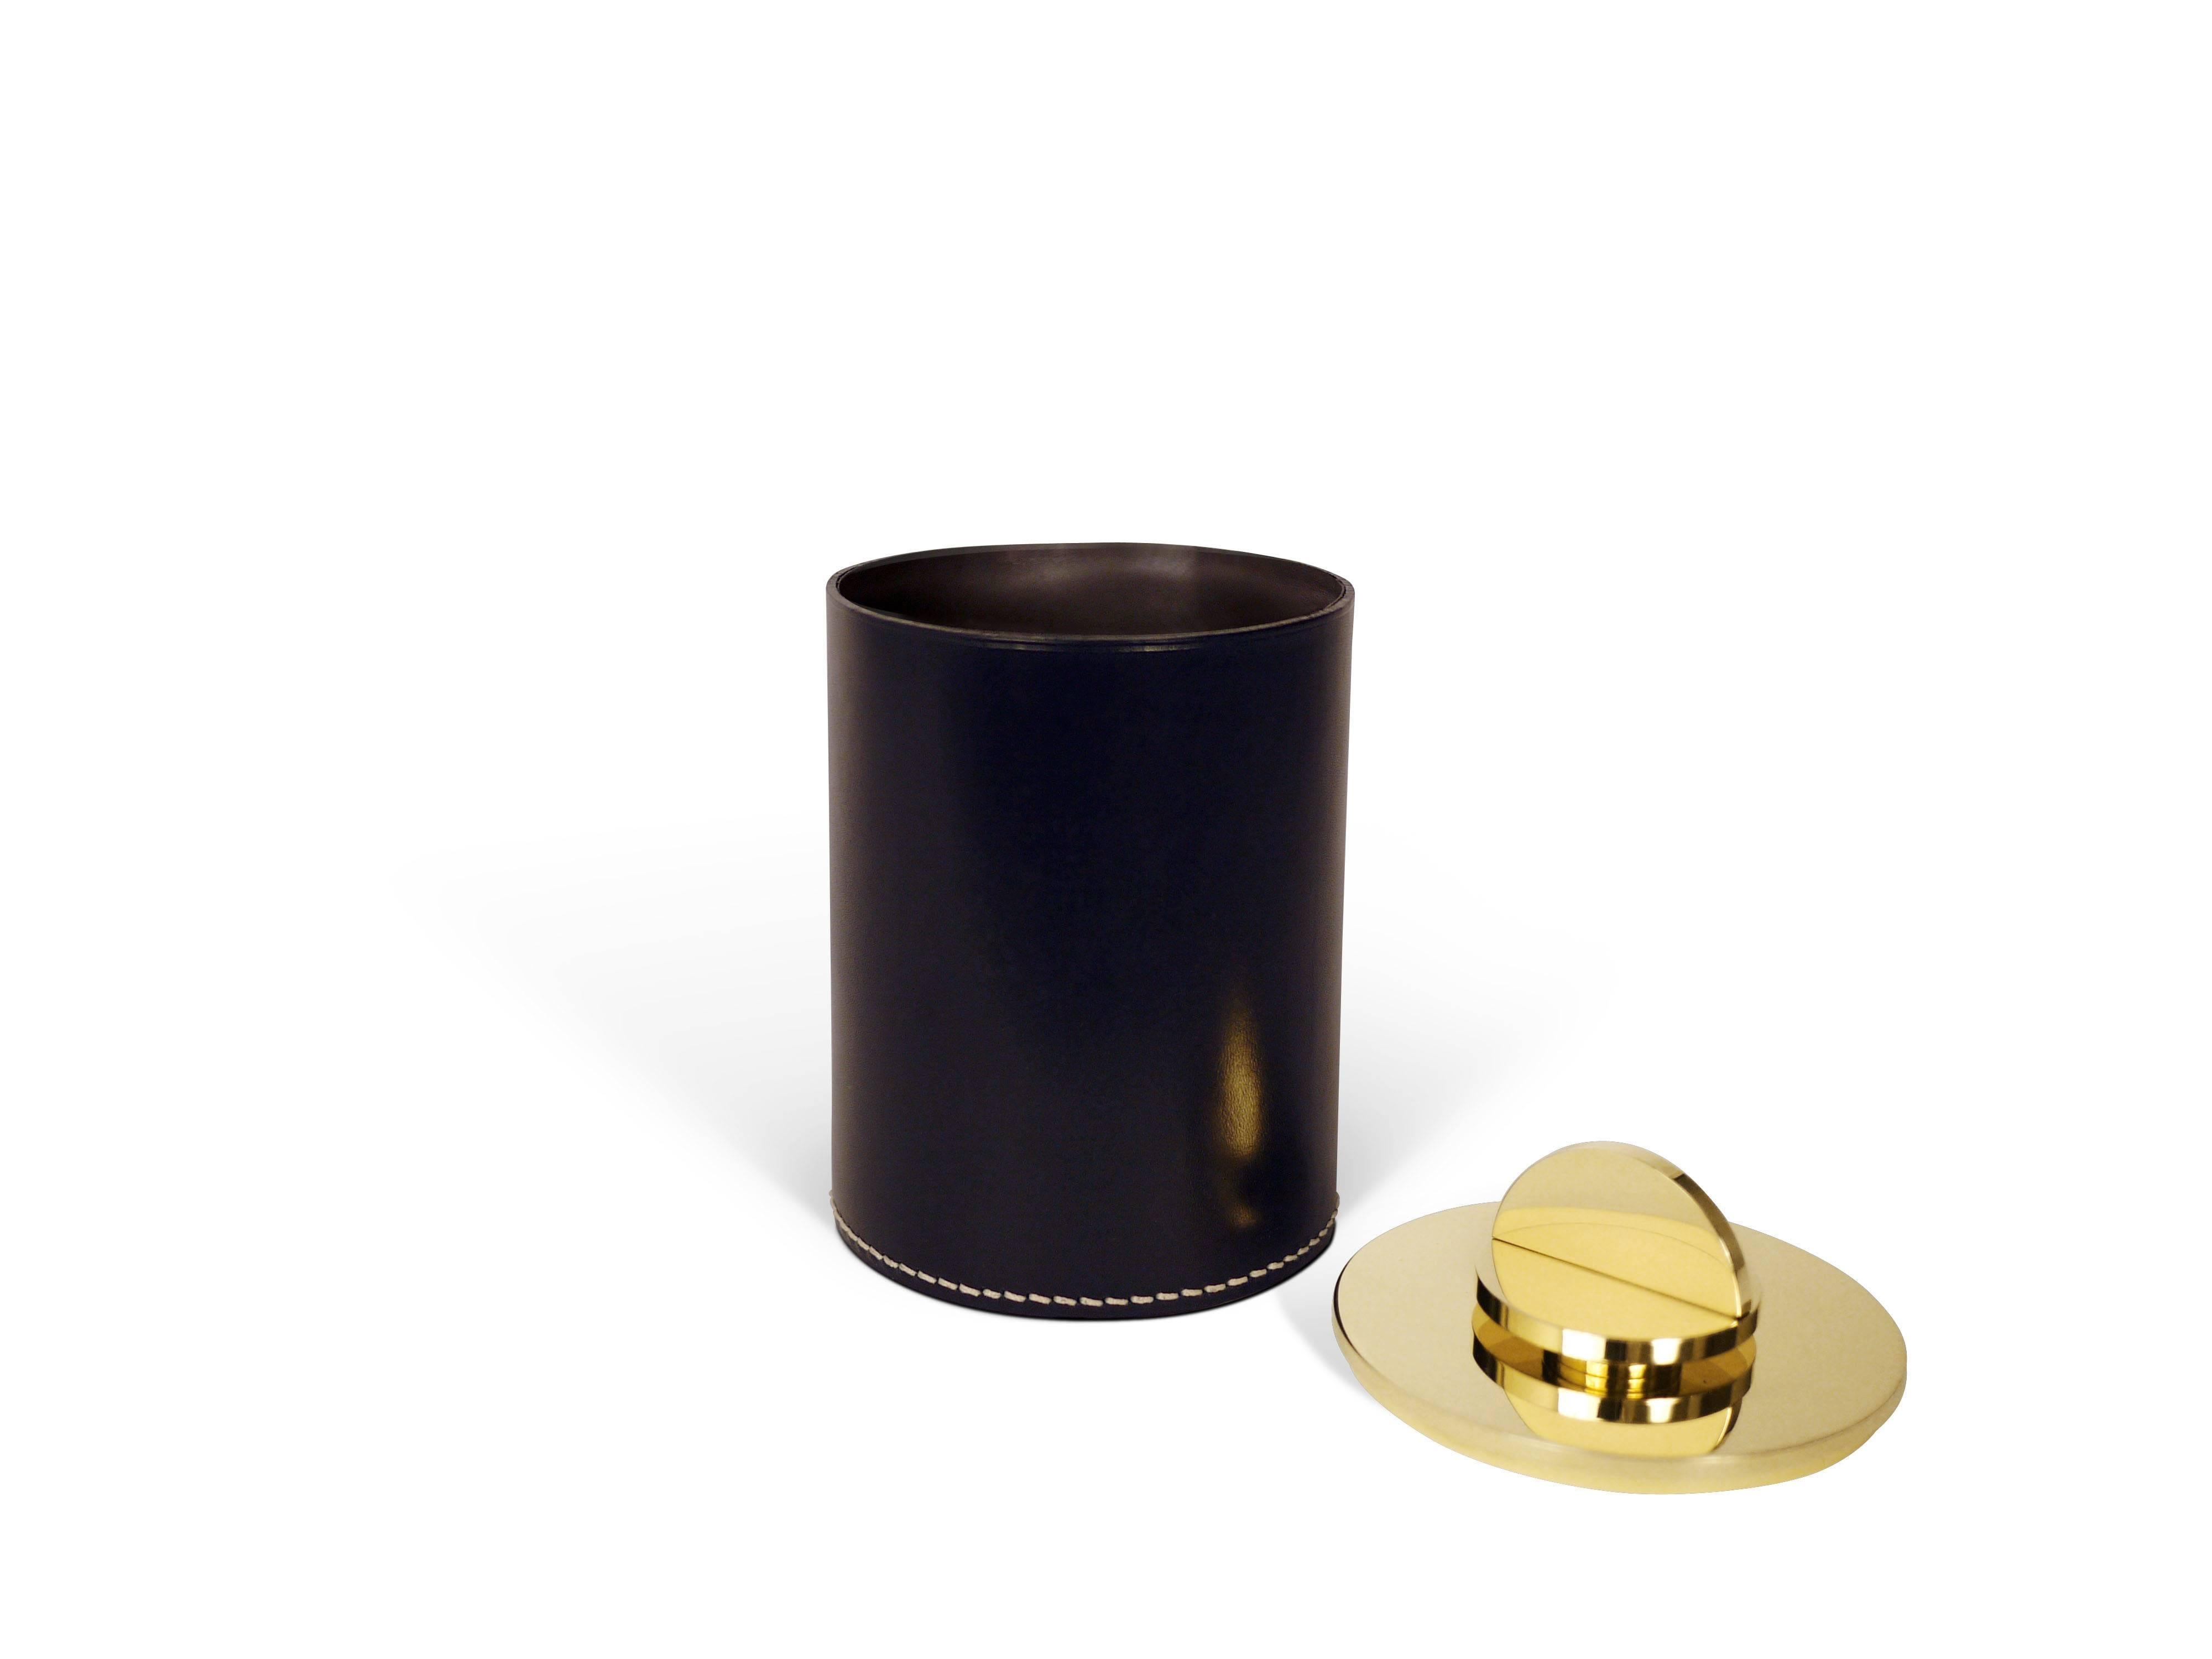 Part of Les Few's Armance collection, this contemporary black round leather and brass modern minimalist box is made by artisans in Sweden. The interior leather comes in either anthracite grey or white. The brass is solid Swedish brass and the